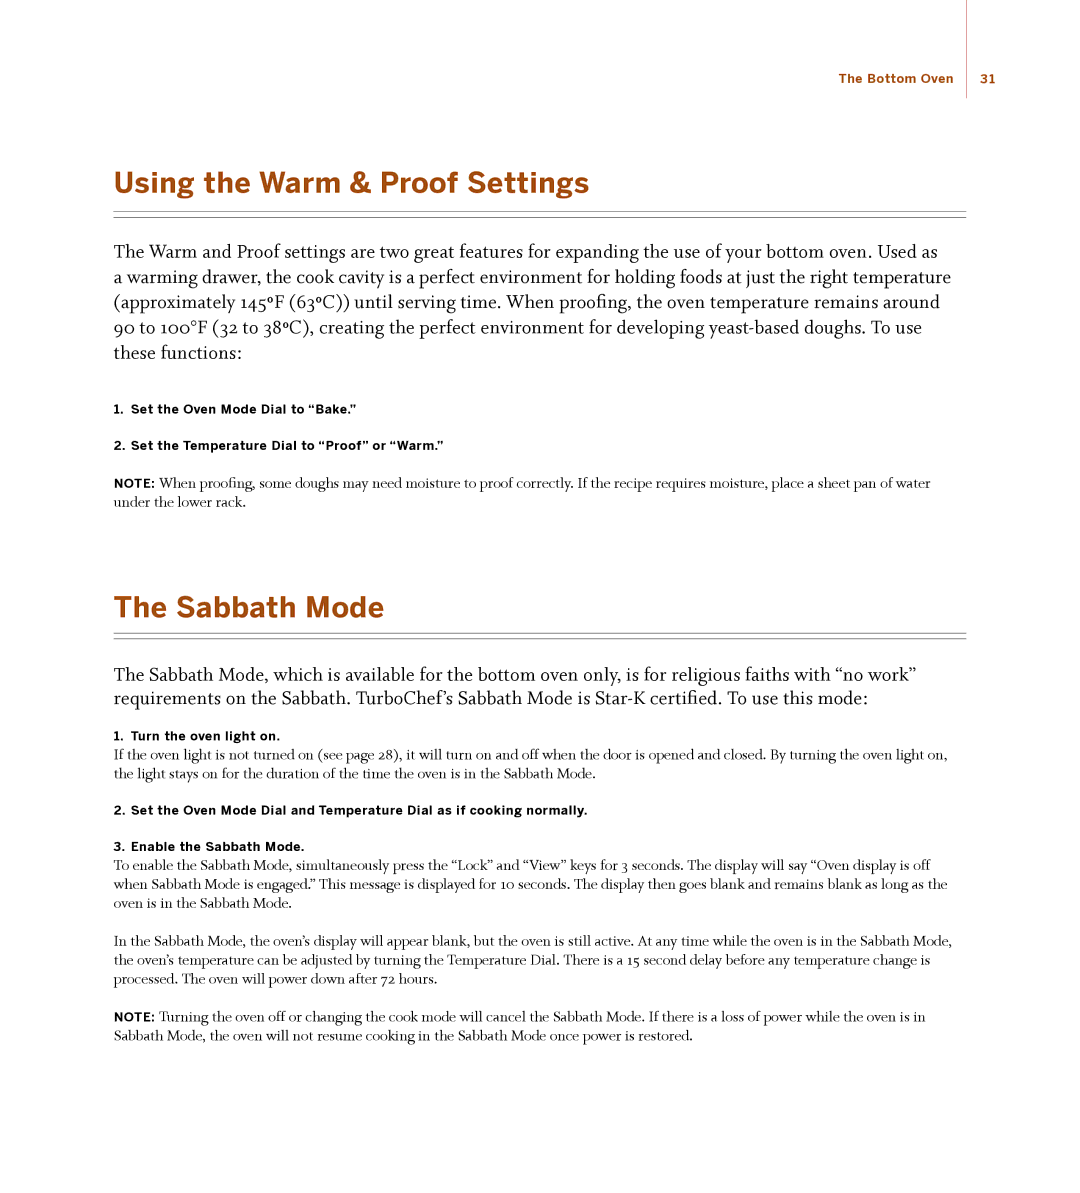 Turbo Chef Technologies 30 manual Using the Warm & Proof Settings, Sabbath Mode, Turn the oven light on 